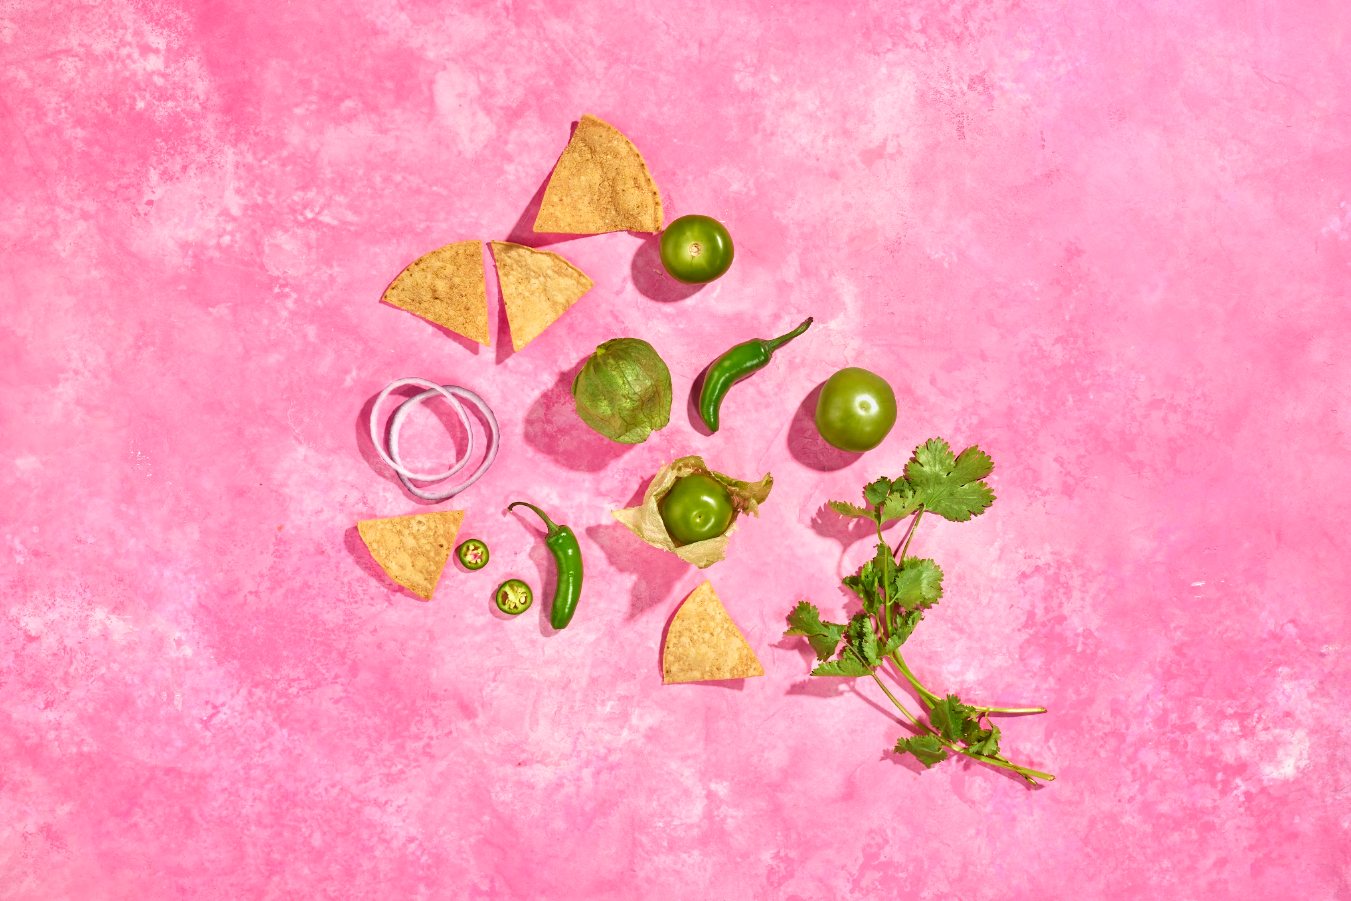 Image of the tortilla chips, cilantro, jalepeños and onions laid out on a pink background